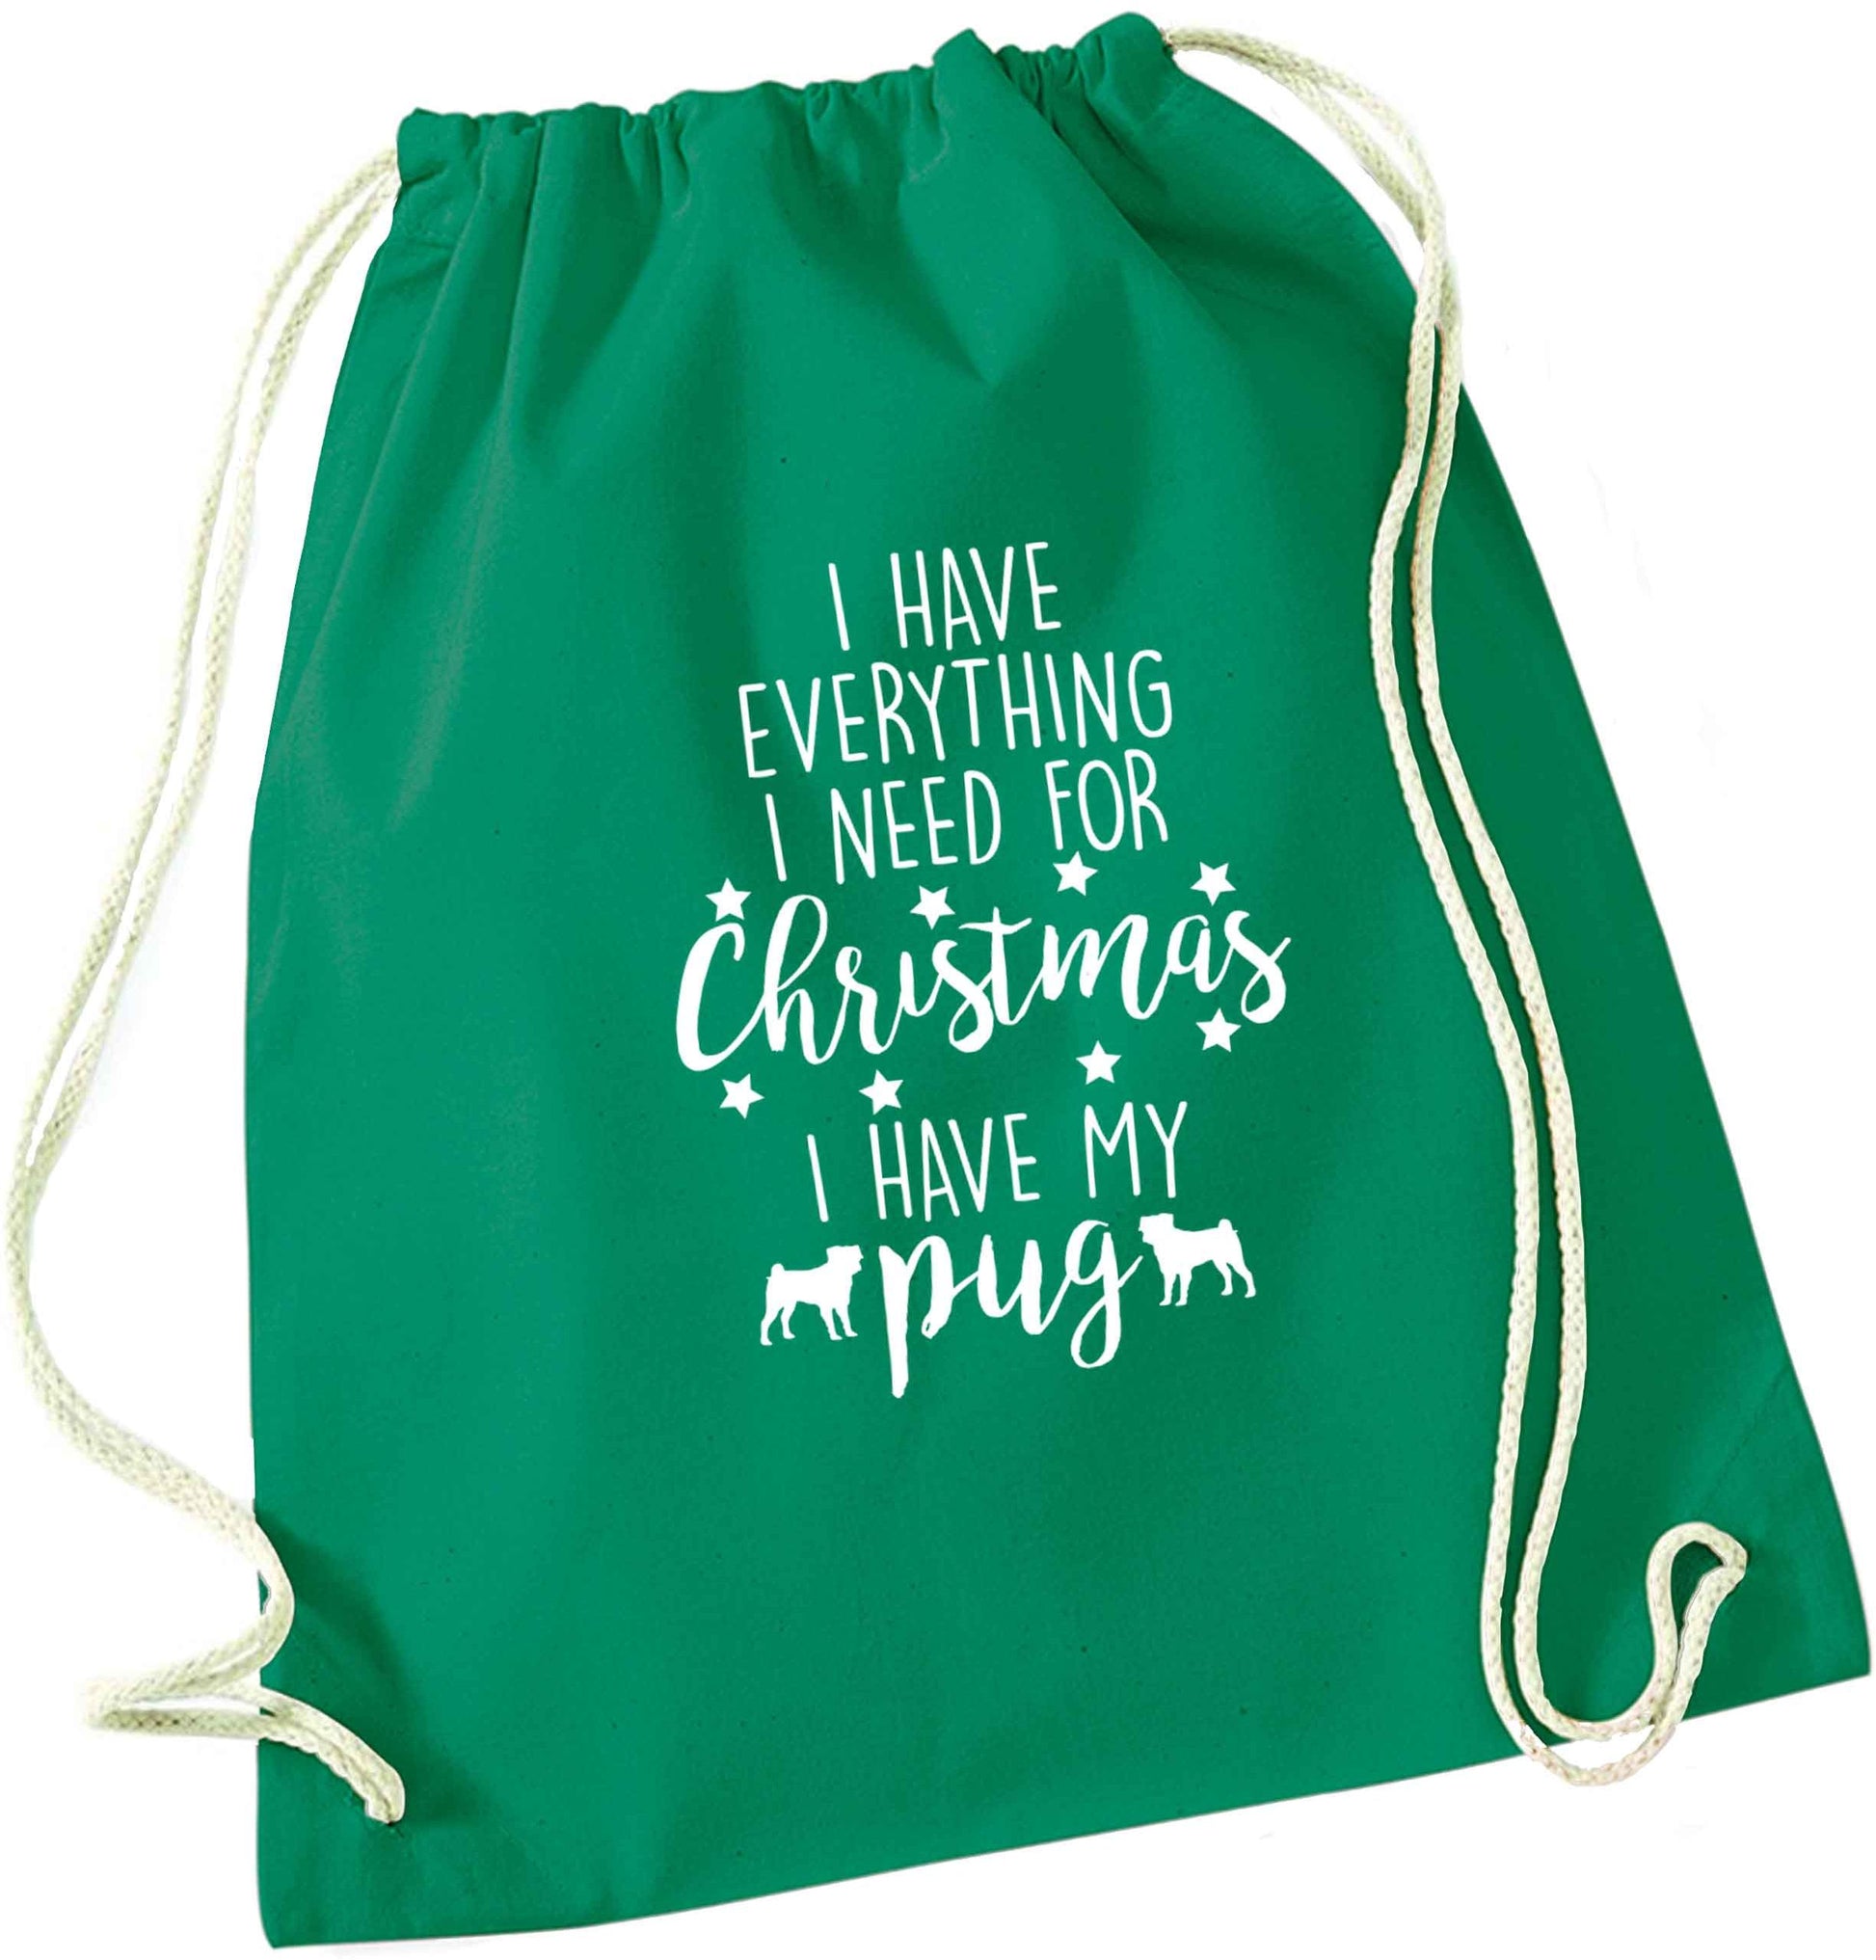 I have everything I need for Christmas I have my pug green drawstring bag